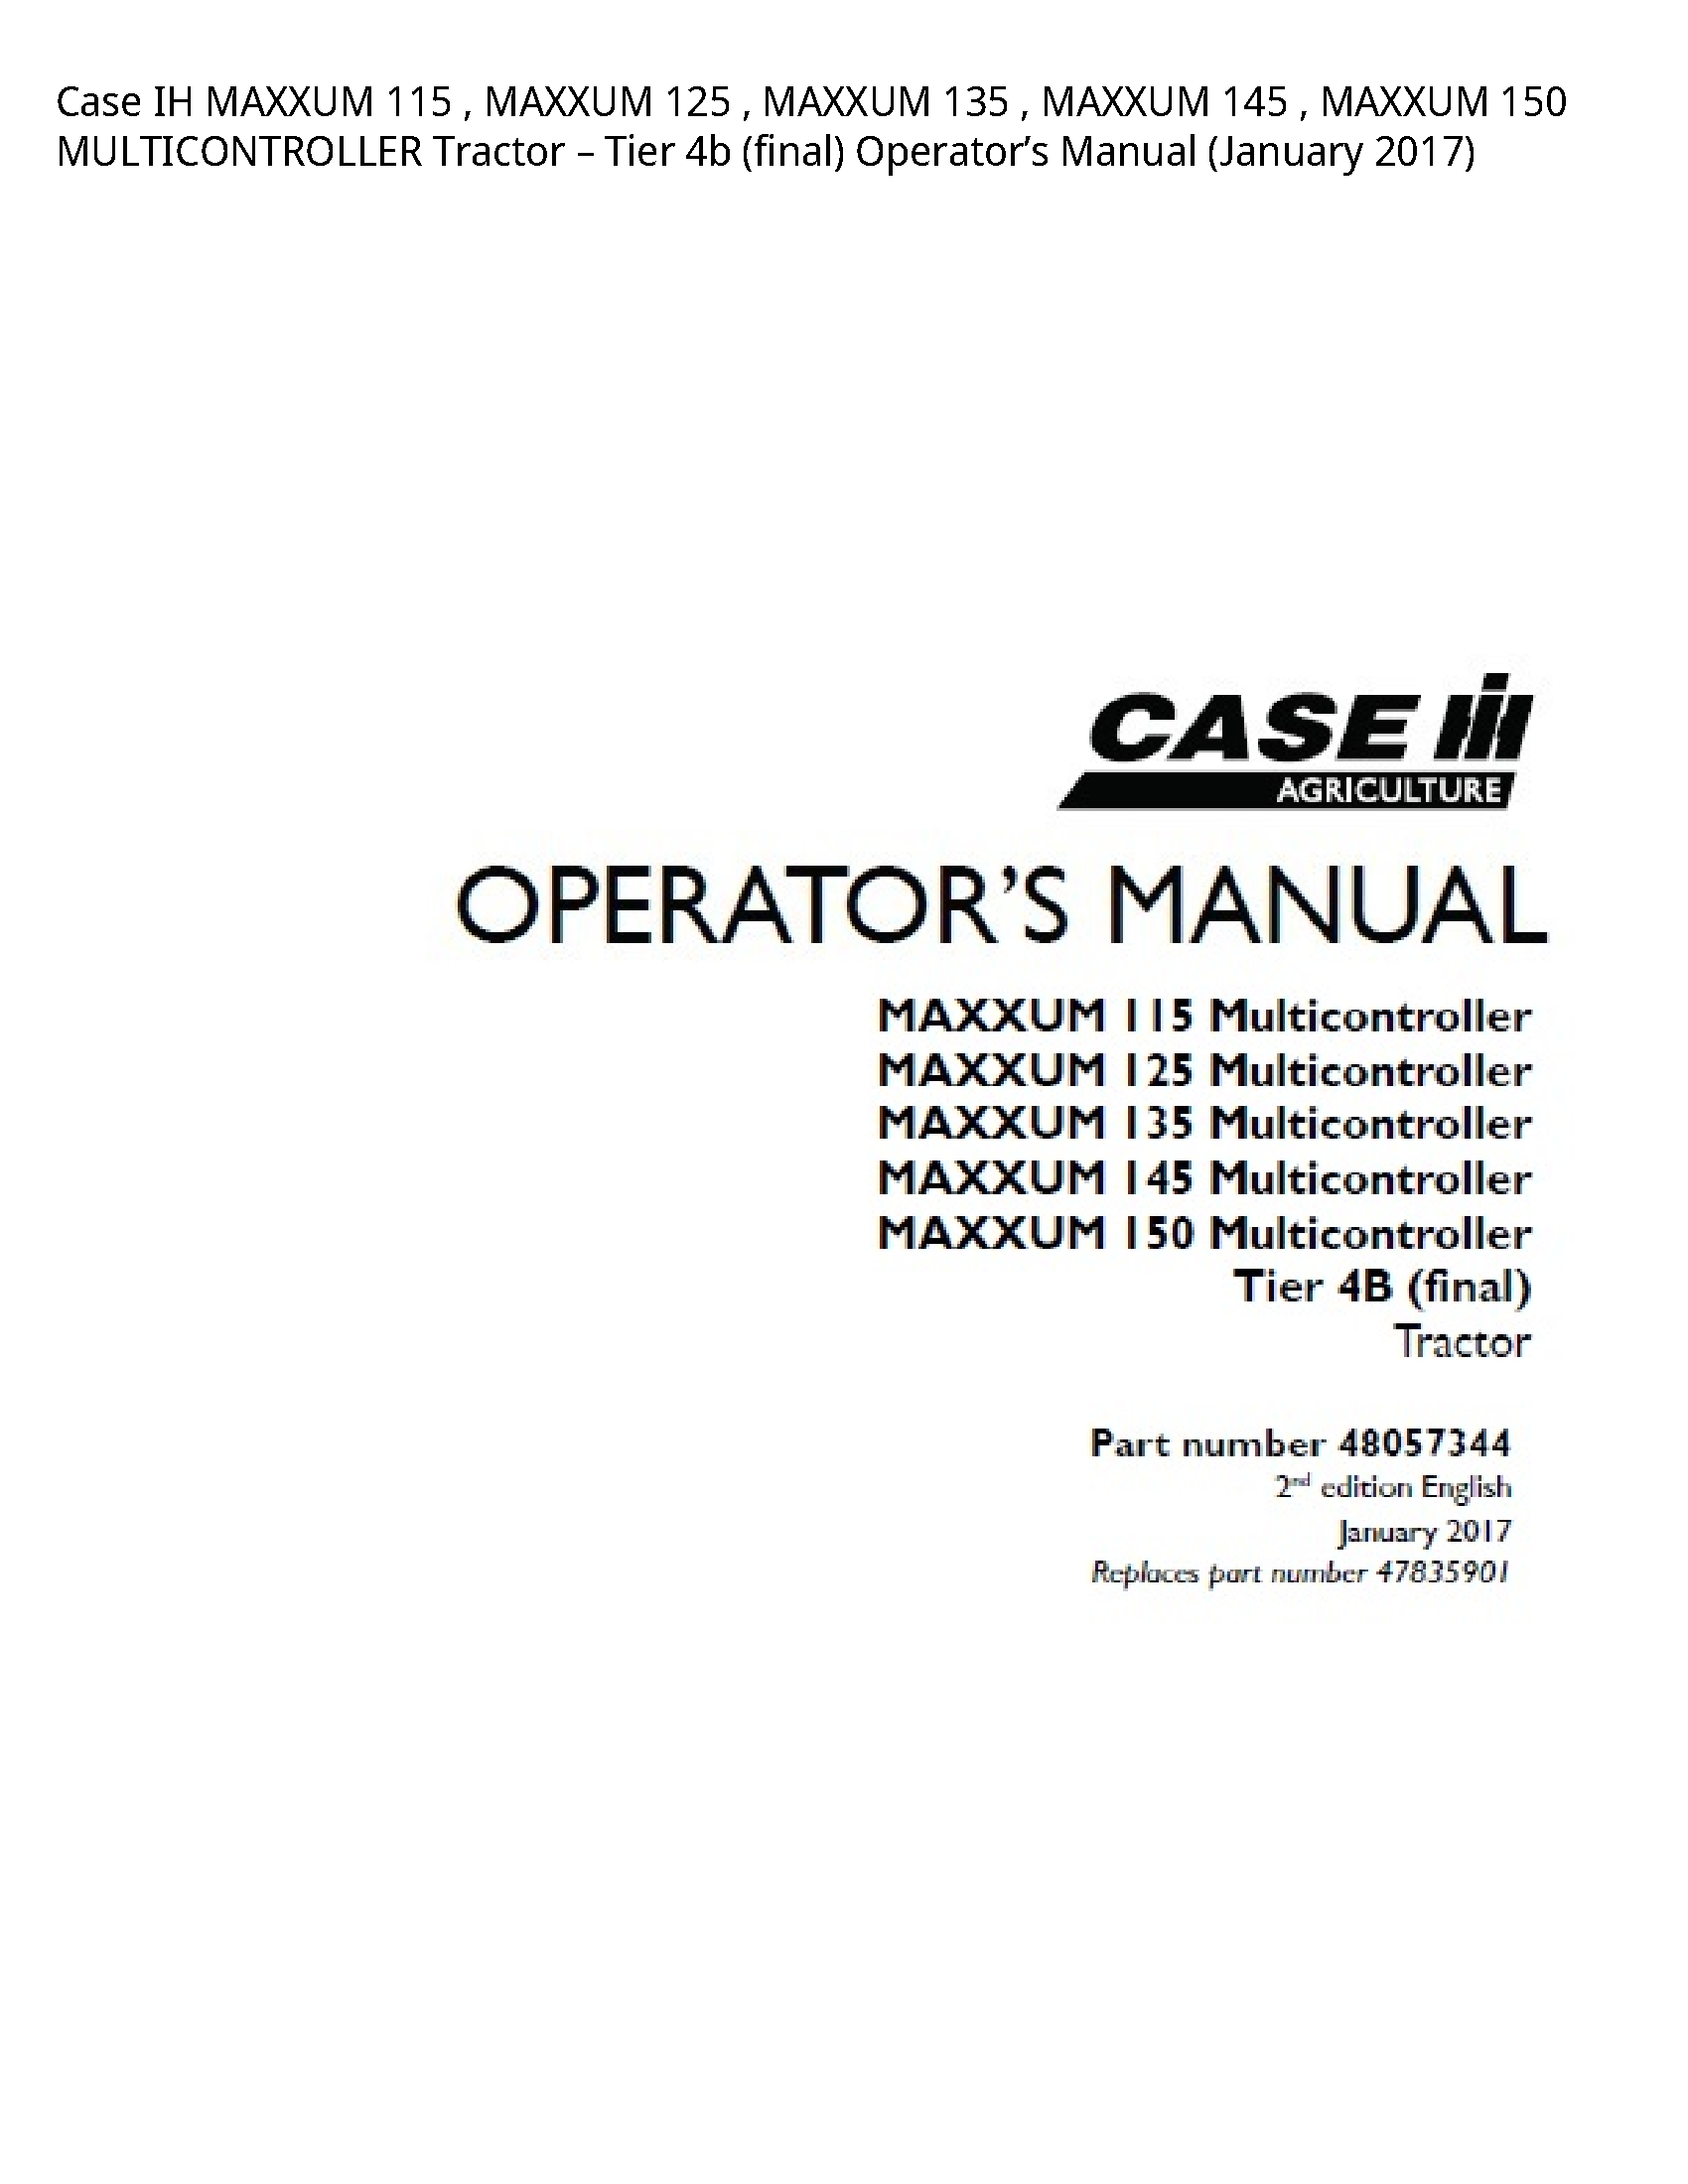 Case/Case IH 115 IH MAXXUM MAXXUM MAXXUM MAXXUM MAXXUM MULTICONTROLLER Tractor Tier (final) Operator’s manual